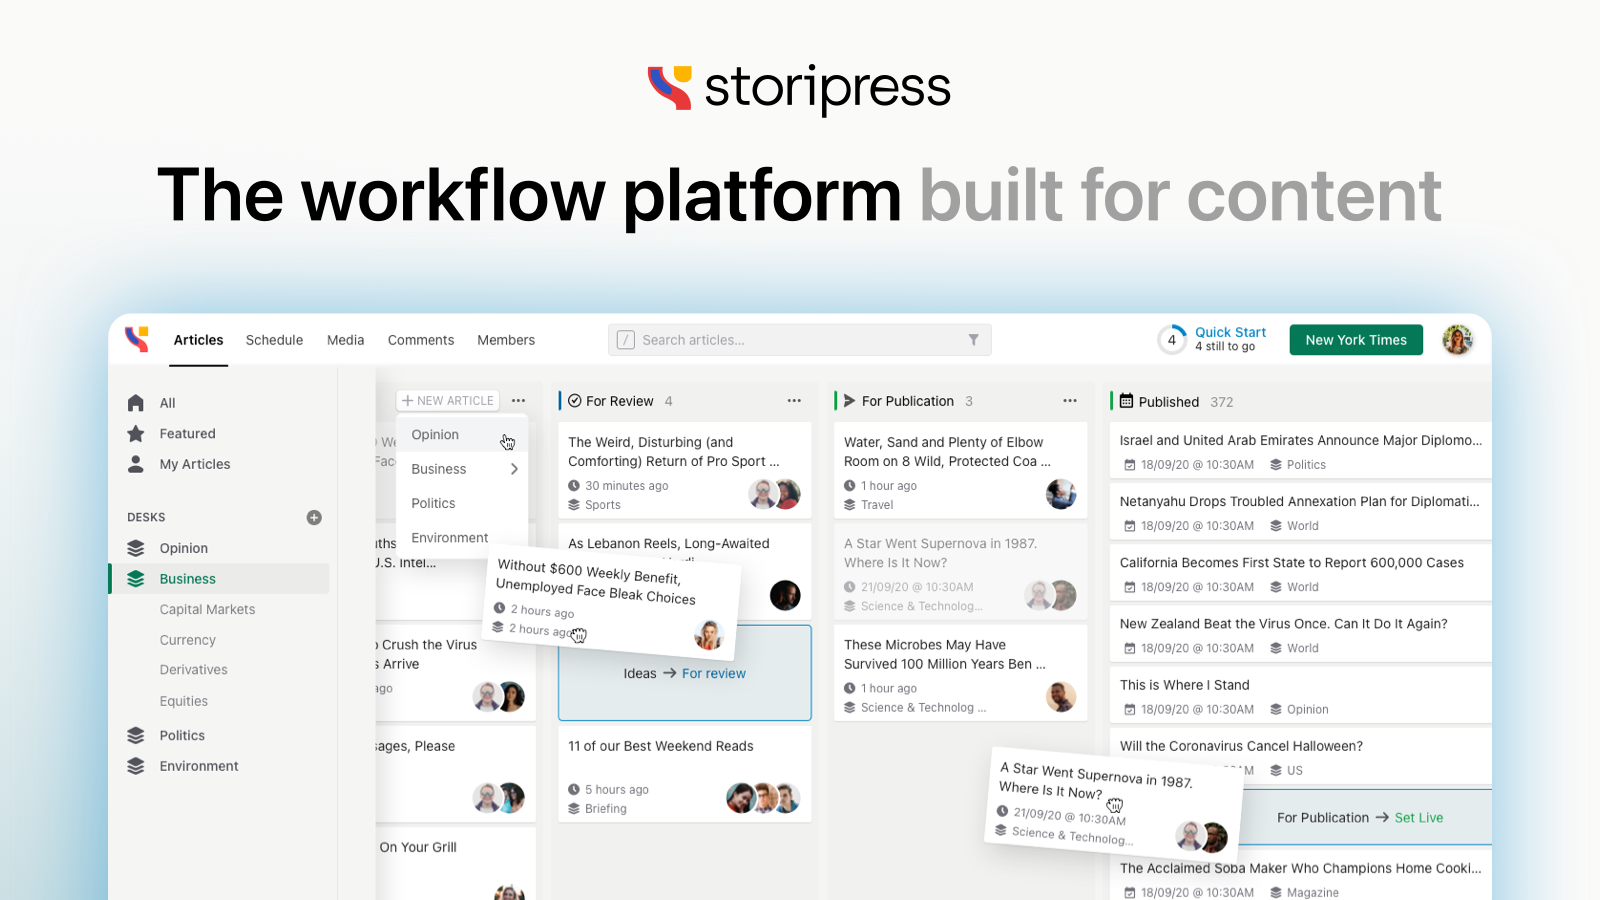 How to Optimize and Scale Your Content Workflow Using Storipress